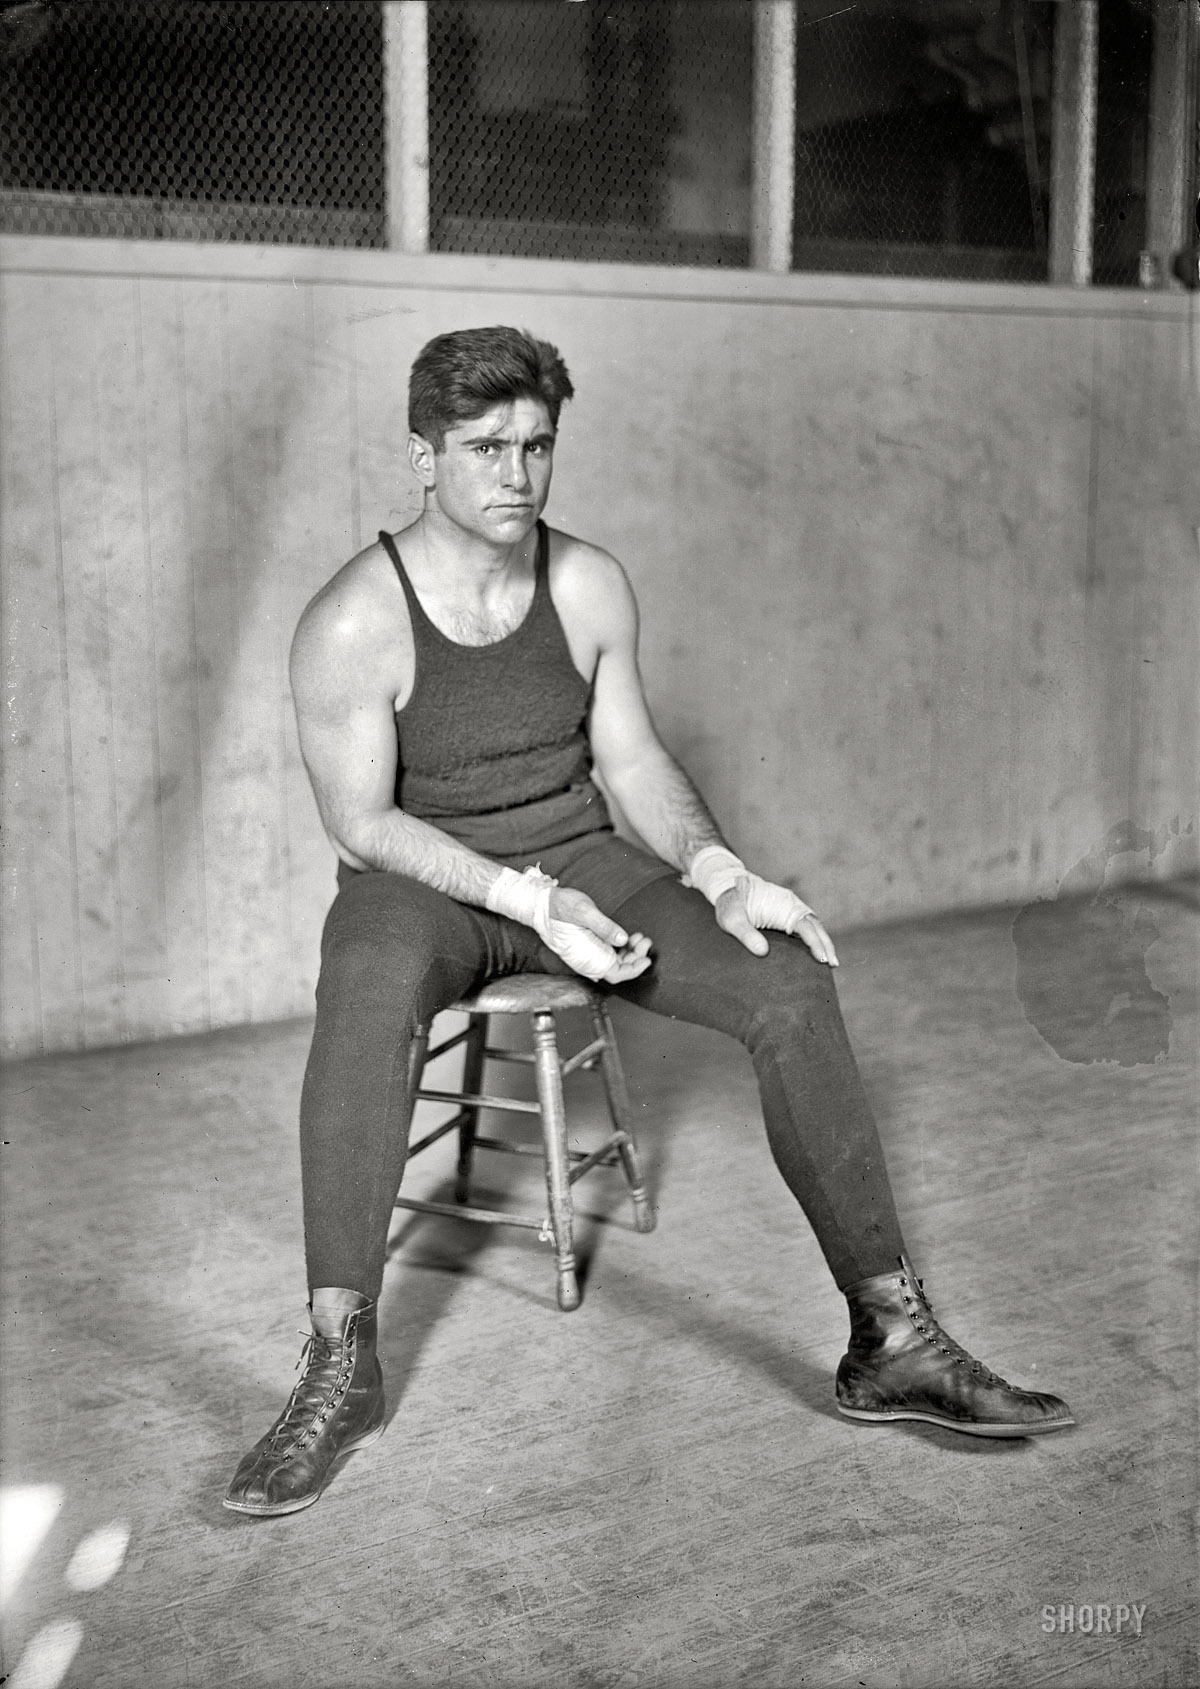 April 1923. "Firpo." The Argentine heavyweight boxer Luis Angel Firpo in New York.  5x7 glass negative, George Grantham Bain Collection. View full size.